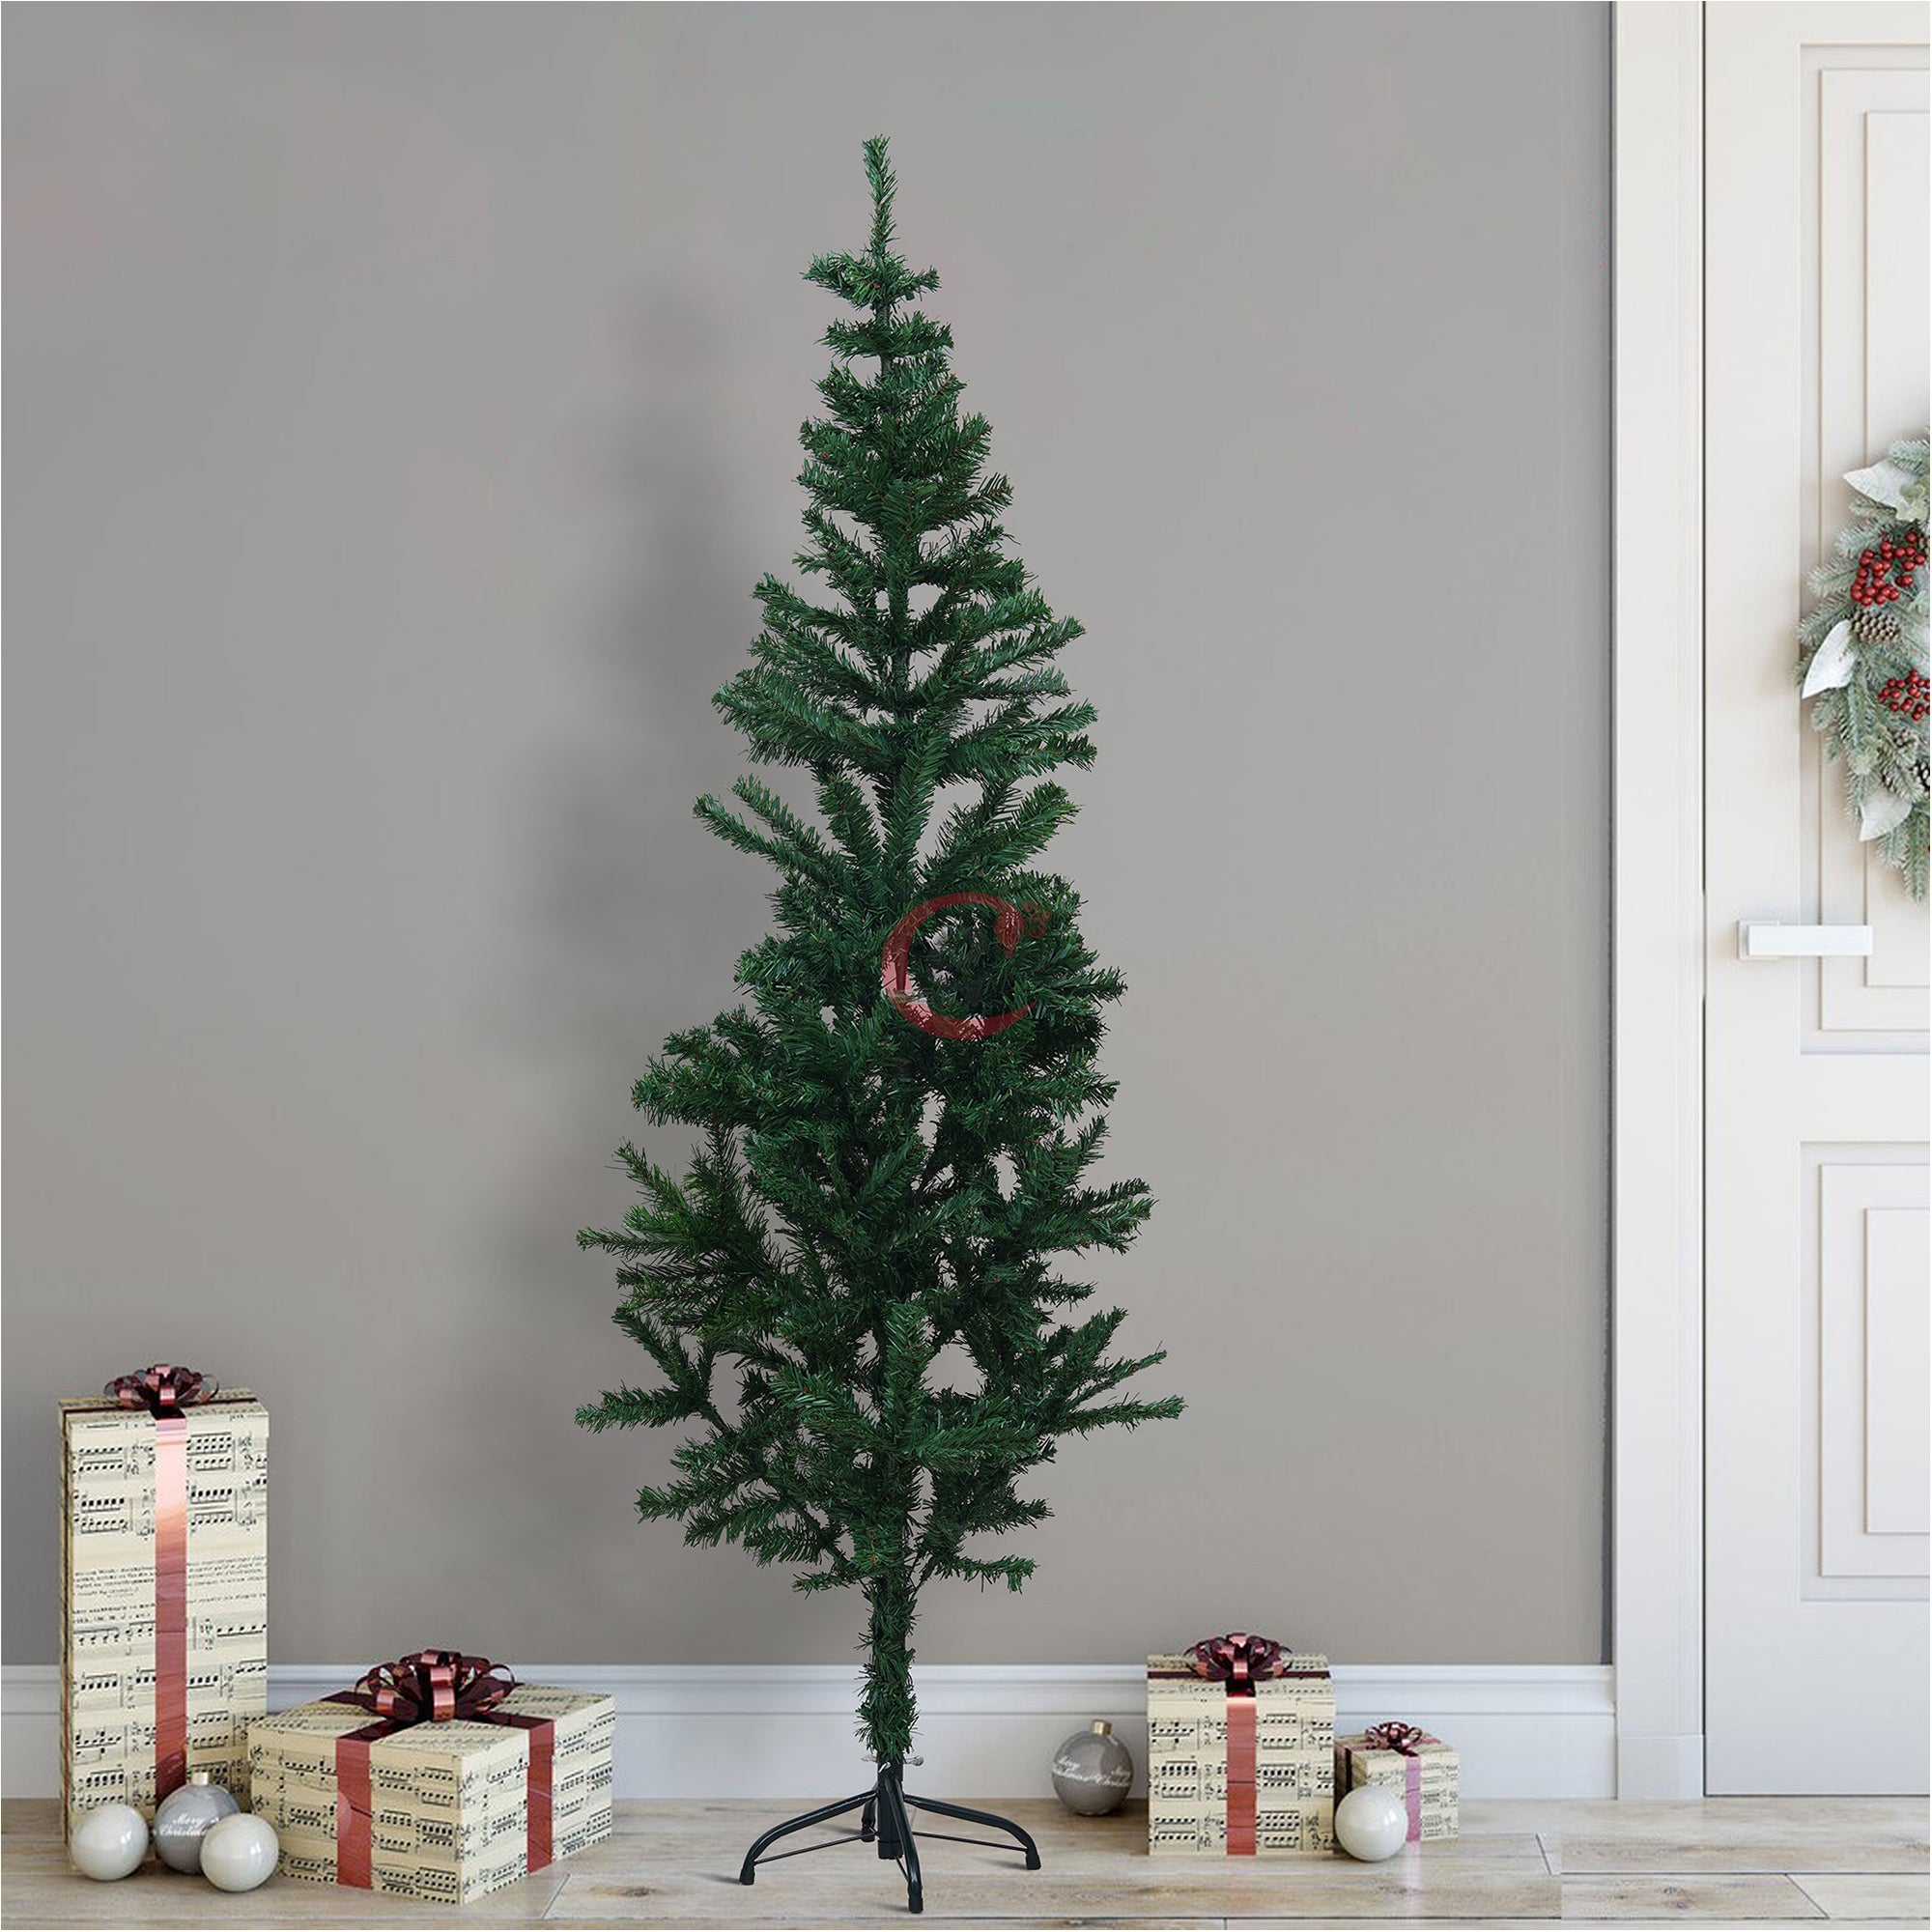 eCraftIndia 5 Feet Green Artificial Christmas Tree Xmas Pine Tree with Stand and 100 Christmas Decoration Ornaments Props - Merry Christmas Decoration Item for Home, Office, and Church 5